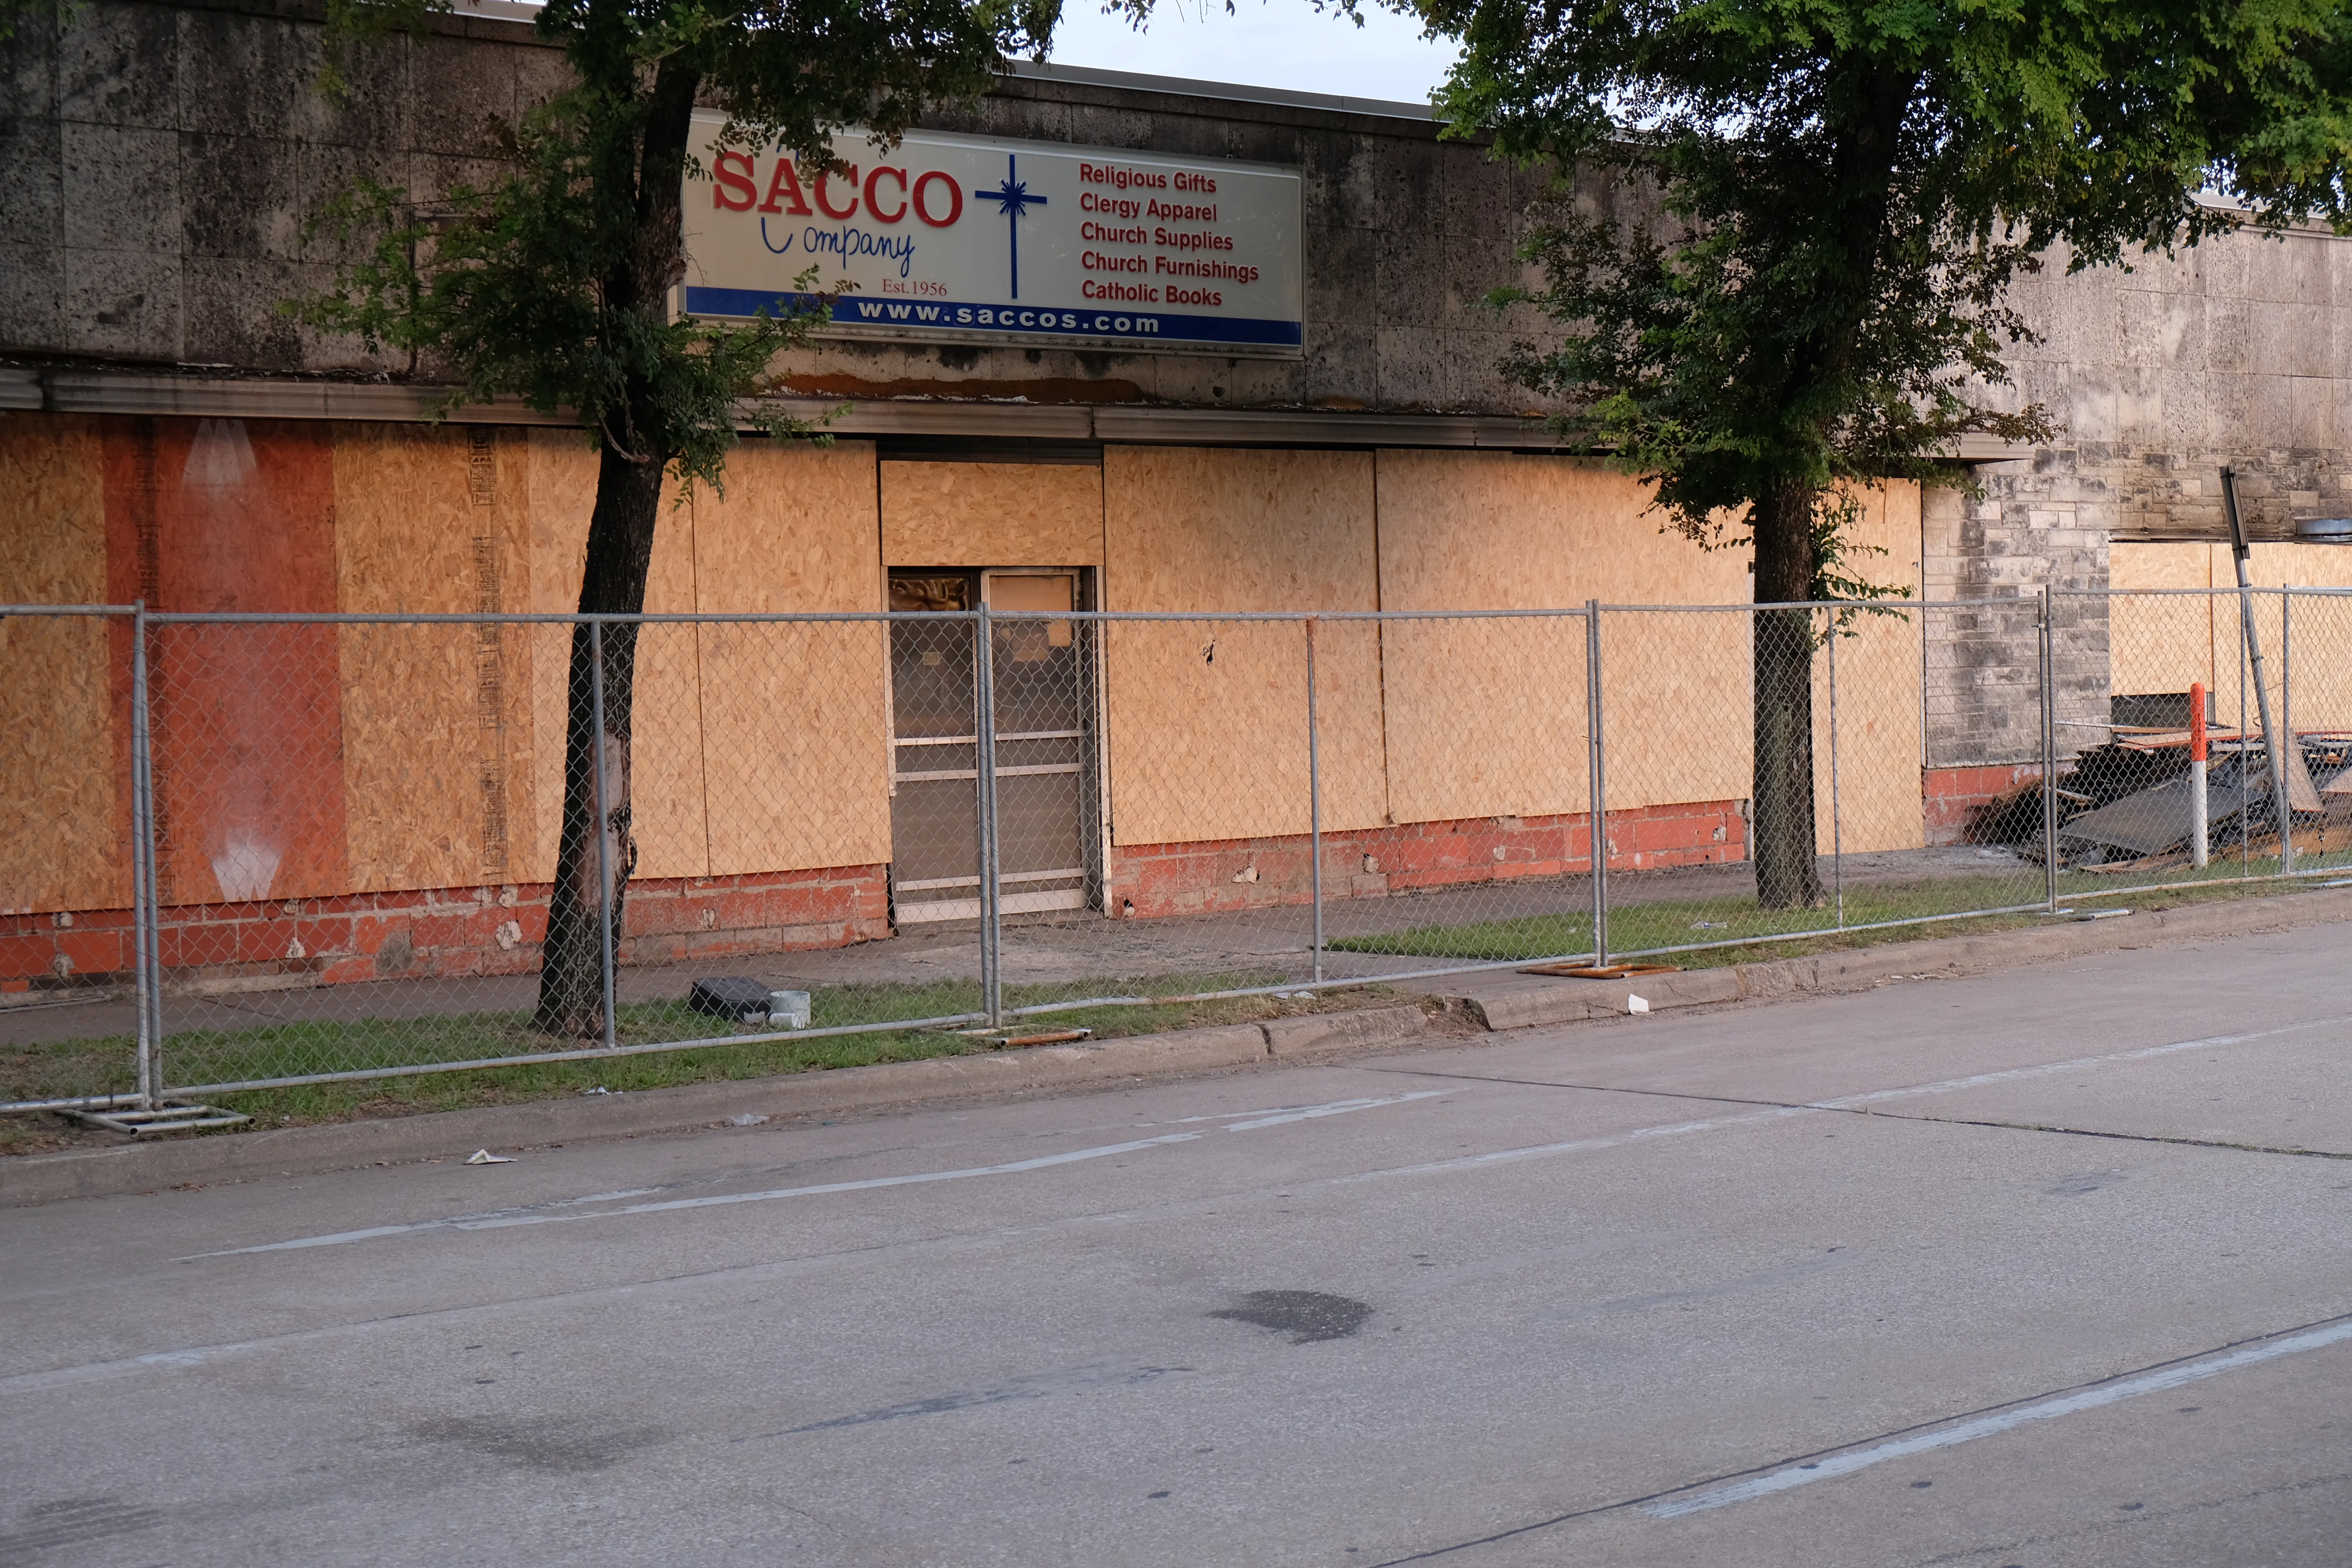 Damage to the San Jacinto location of the Sacco Company Catholic Store in Houston after a fire on June 25, 2022.?w=200&h=150